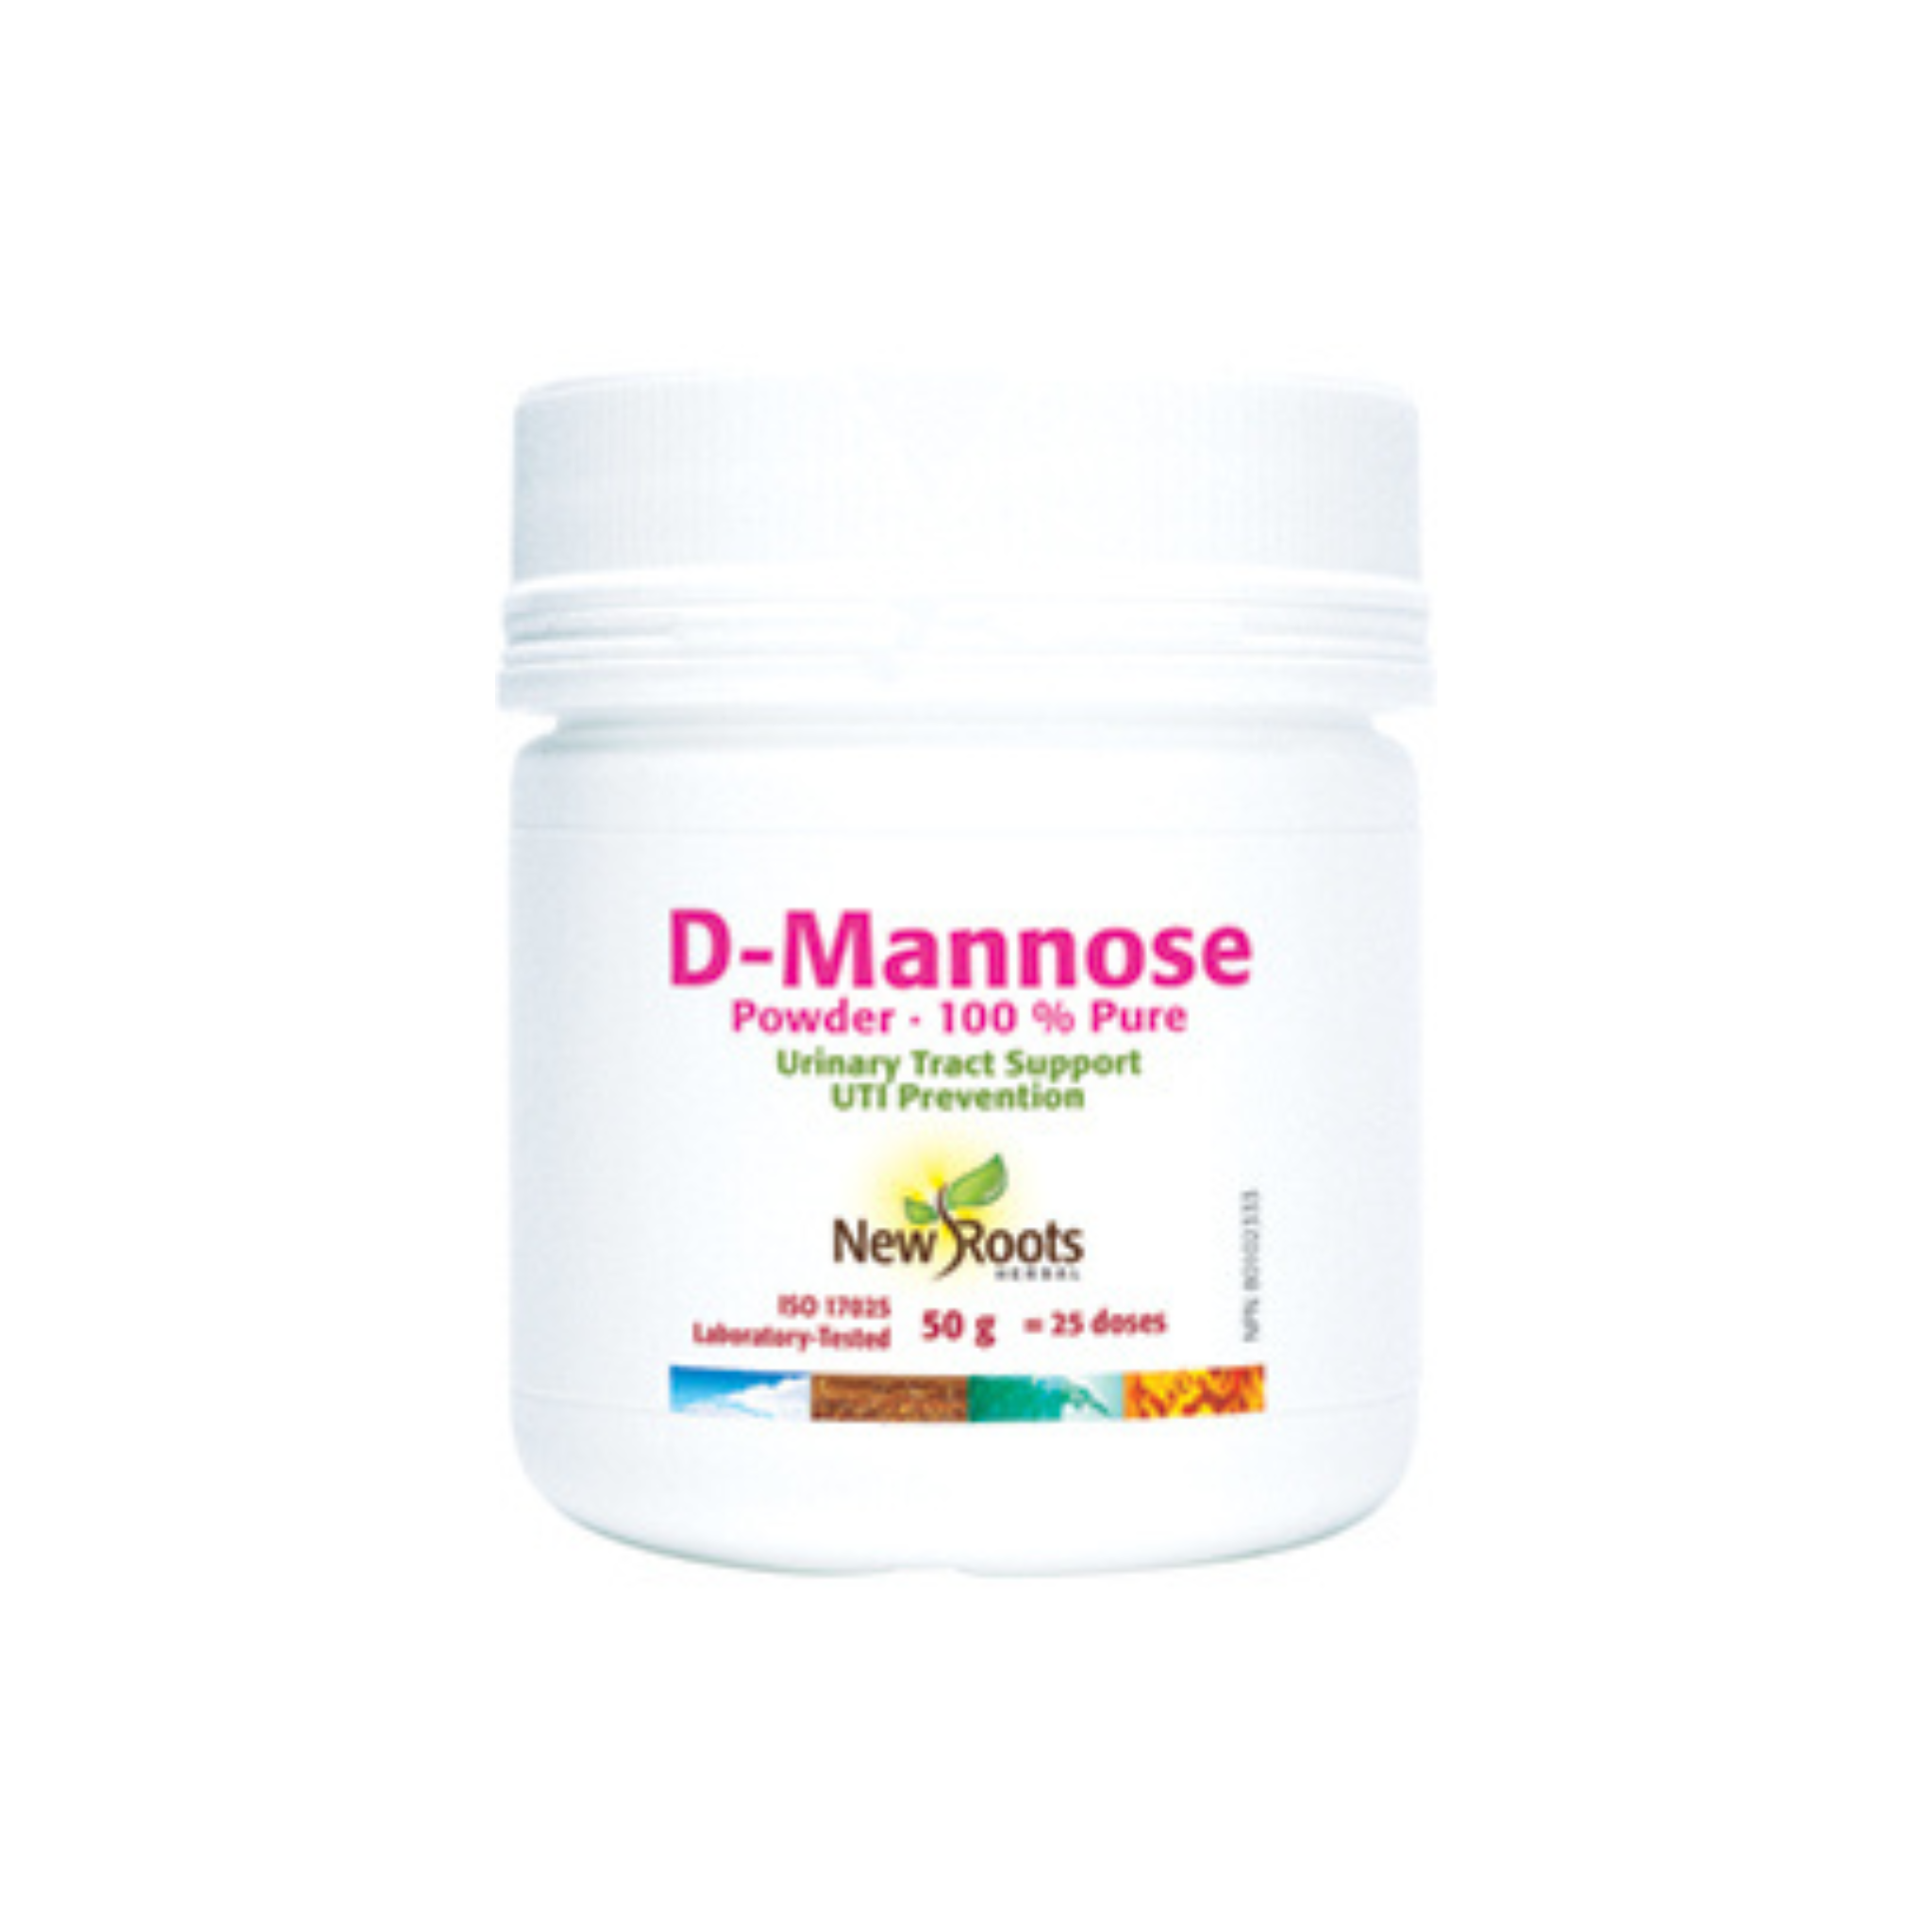 New Roots D-Mannose Powder 50 G